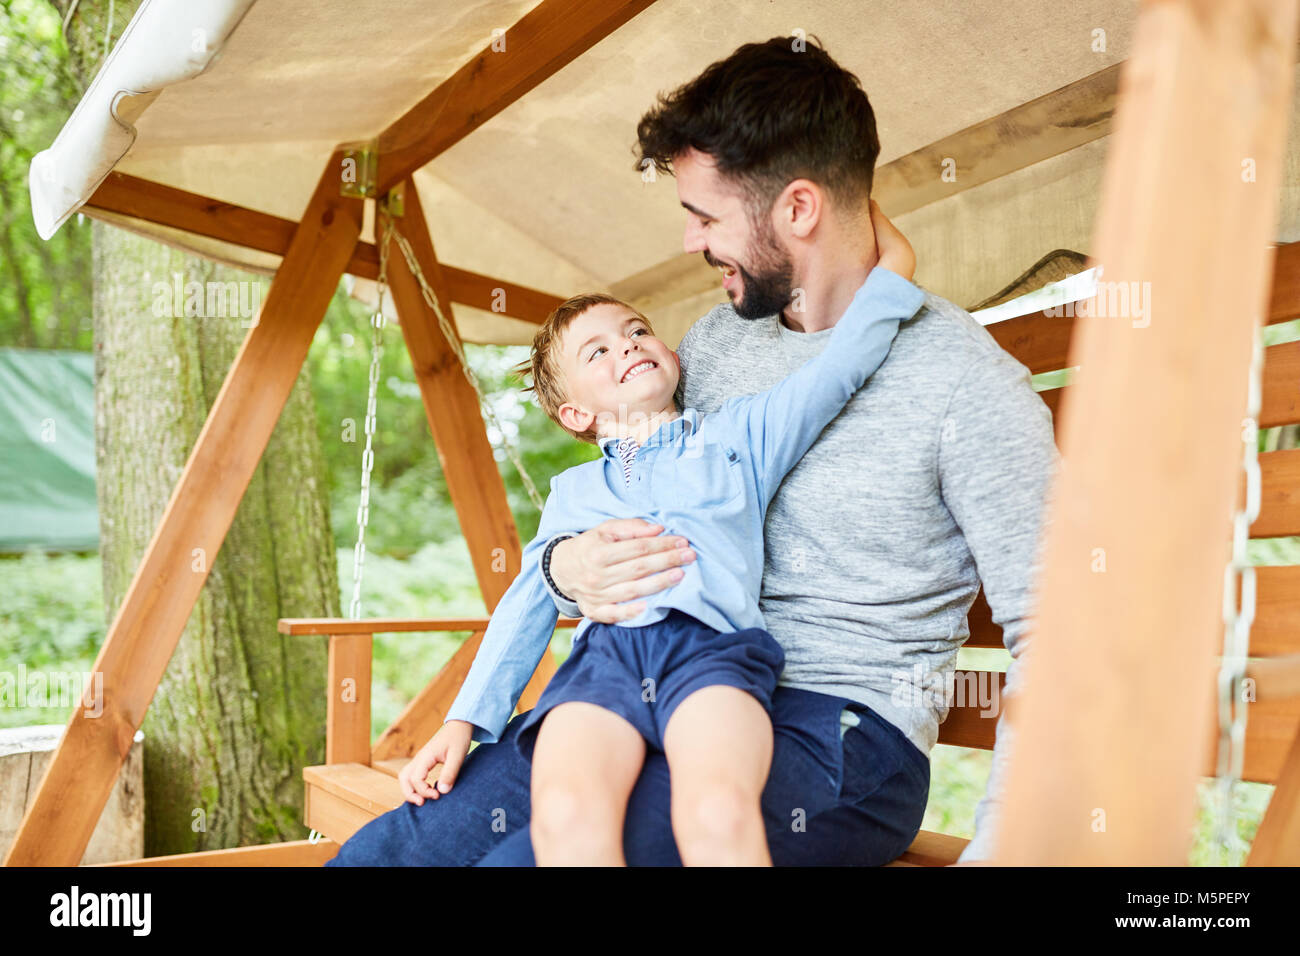 Boy is kidding with his father around on the garden swing in the garden Stock Photo